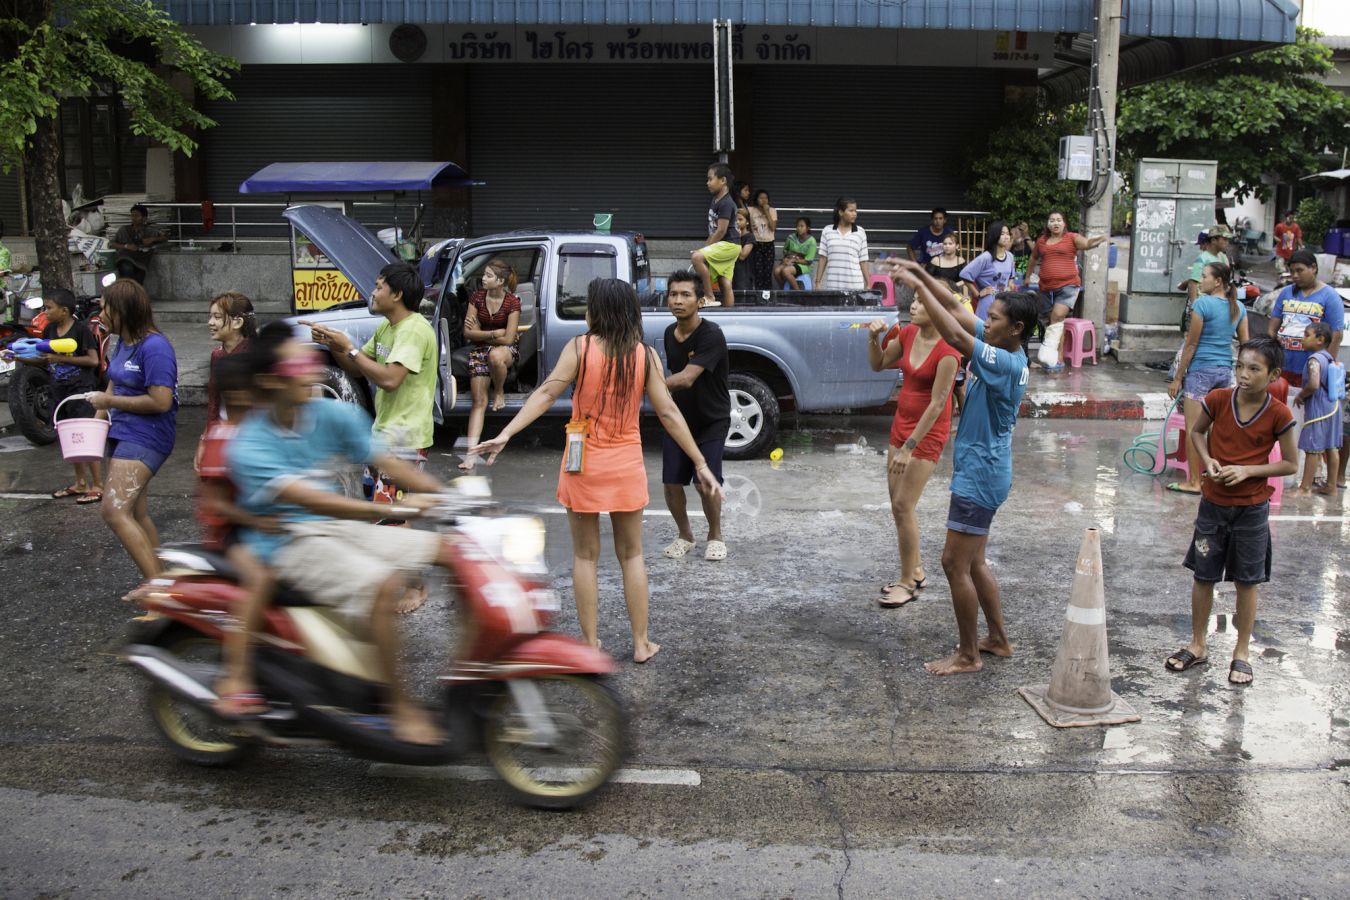 A motorcycle careens by Songkran revelers ready to splash passing vehicles in a 2015 file photo taken in Bangkok’s Min Buri district. Photo: Alexander Hotz/Coconuts Media